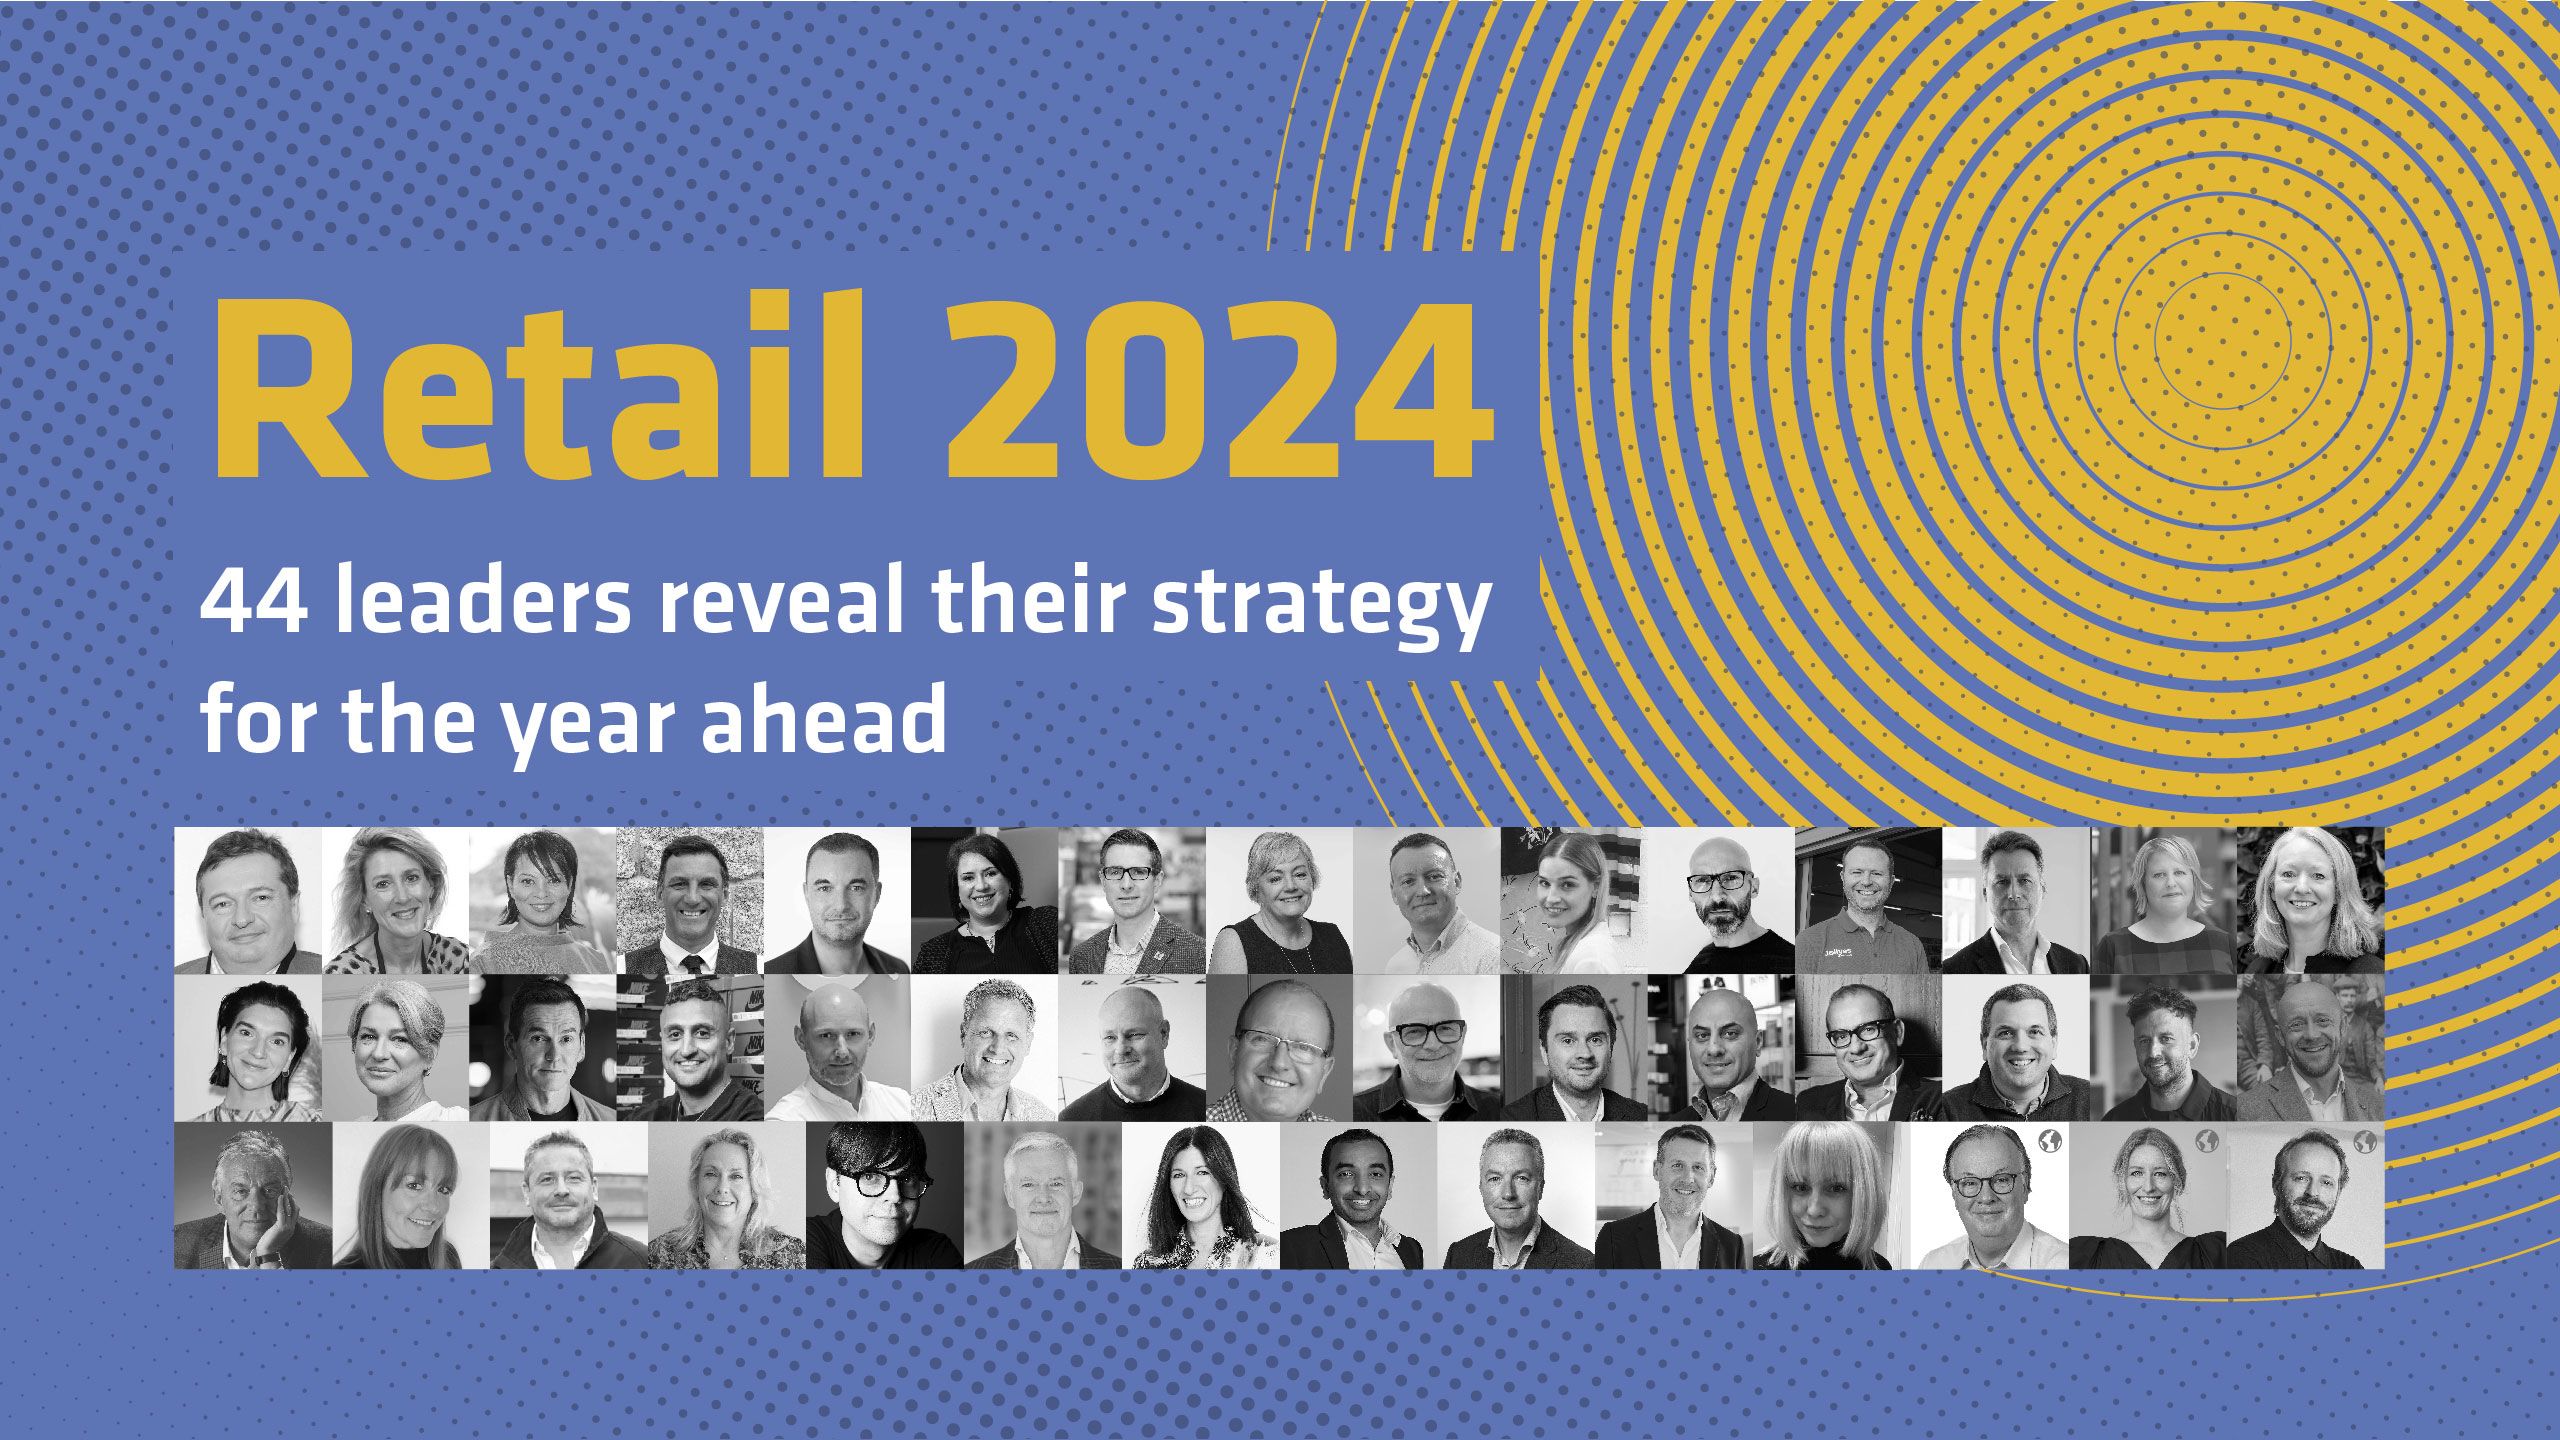 Artwork with text reading: Retail 2024: 44 leaders reveal their strategy for the year ahead and showing headshots of all the CEOs from the report